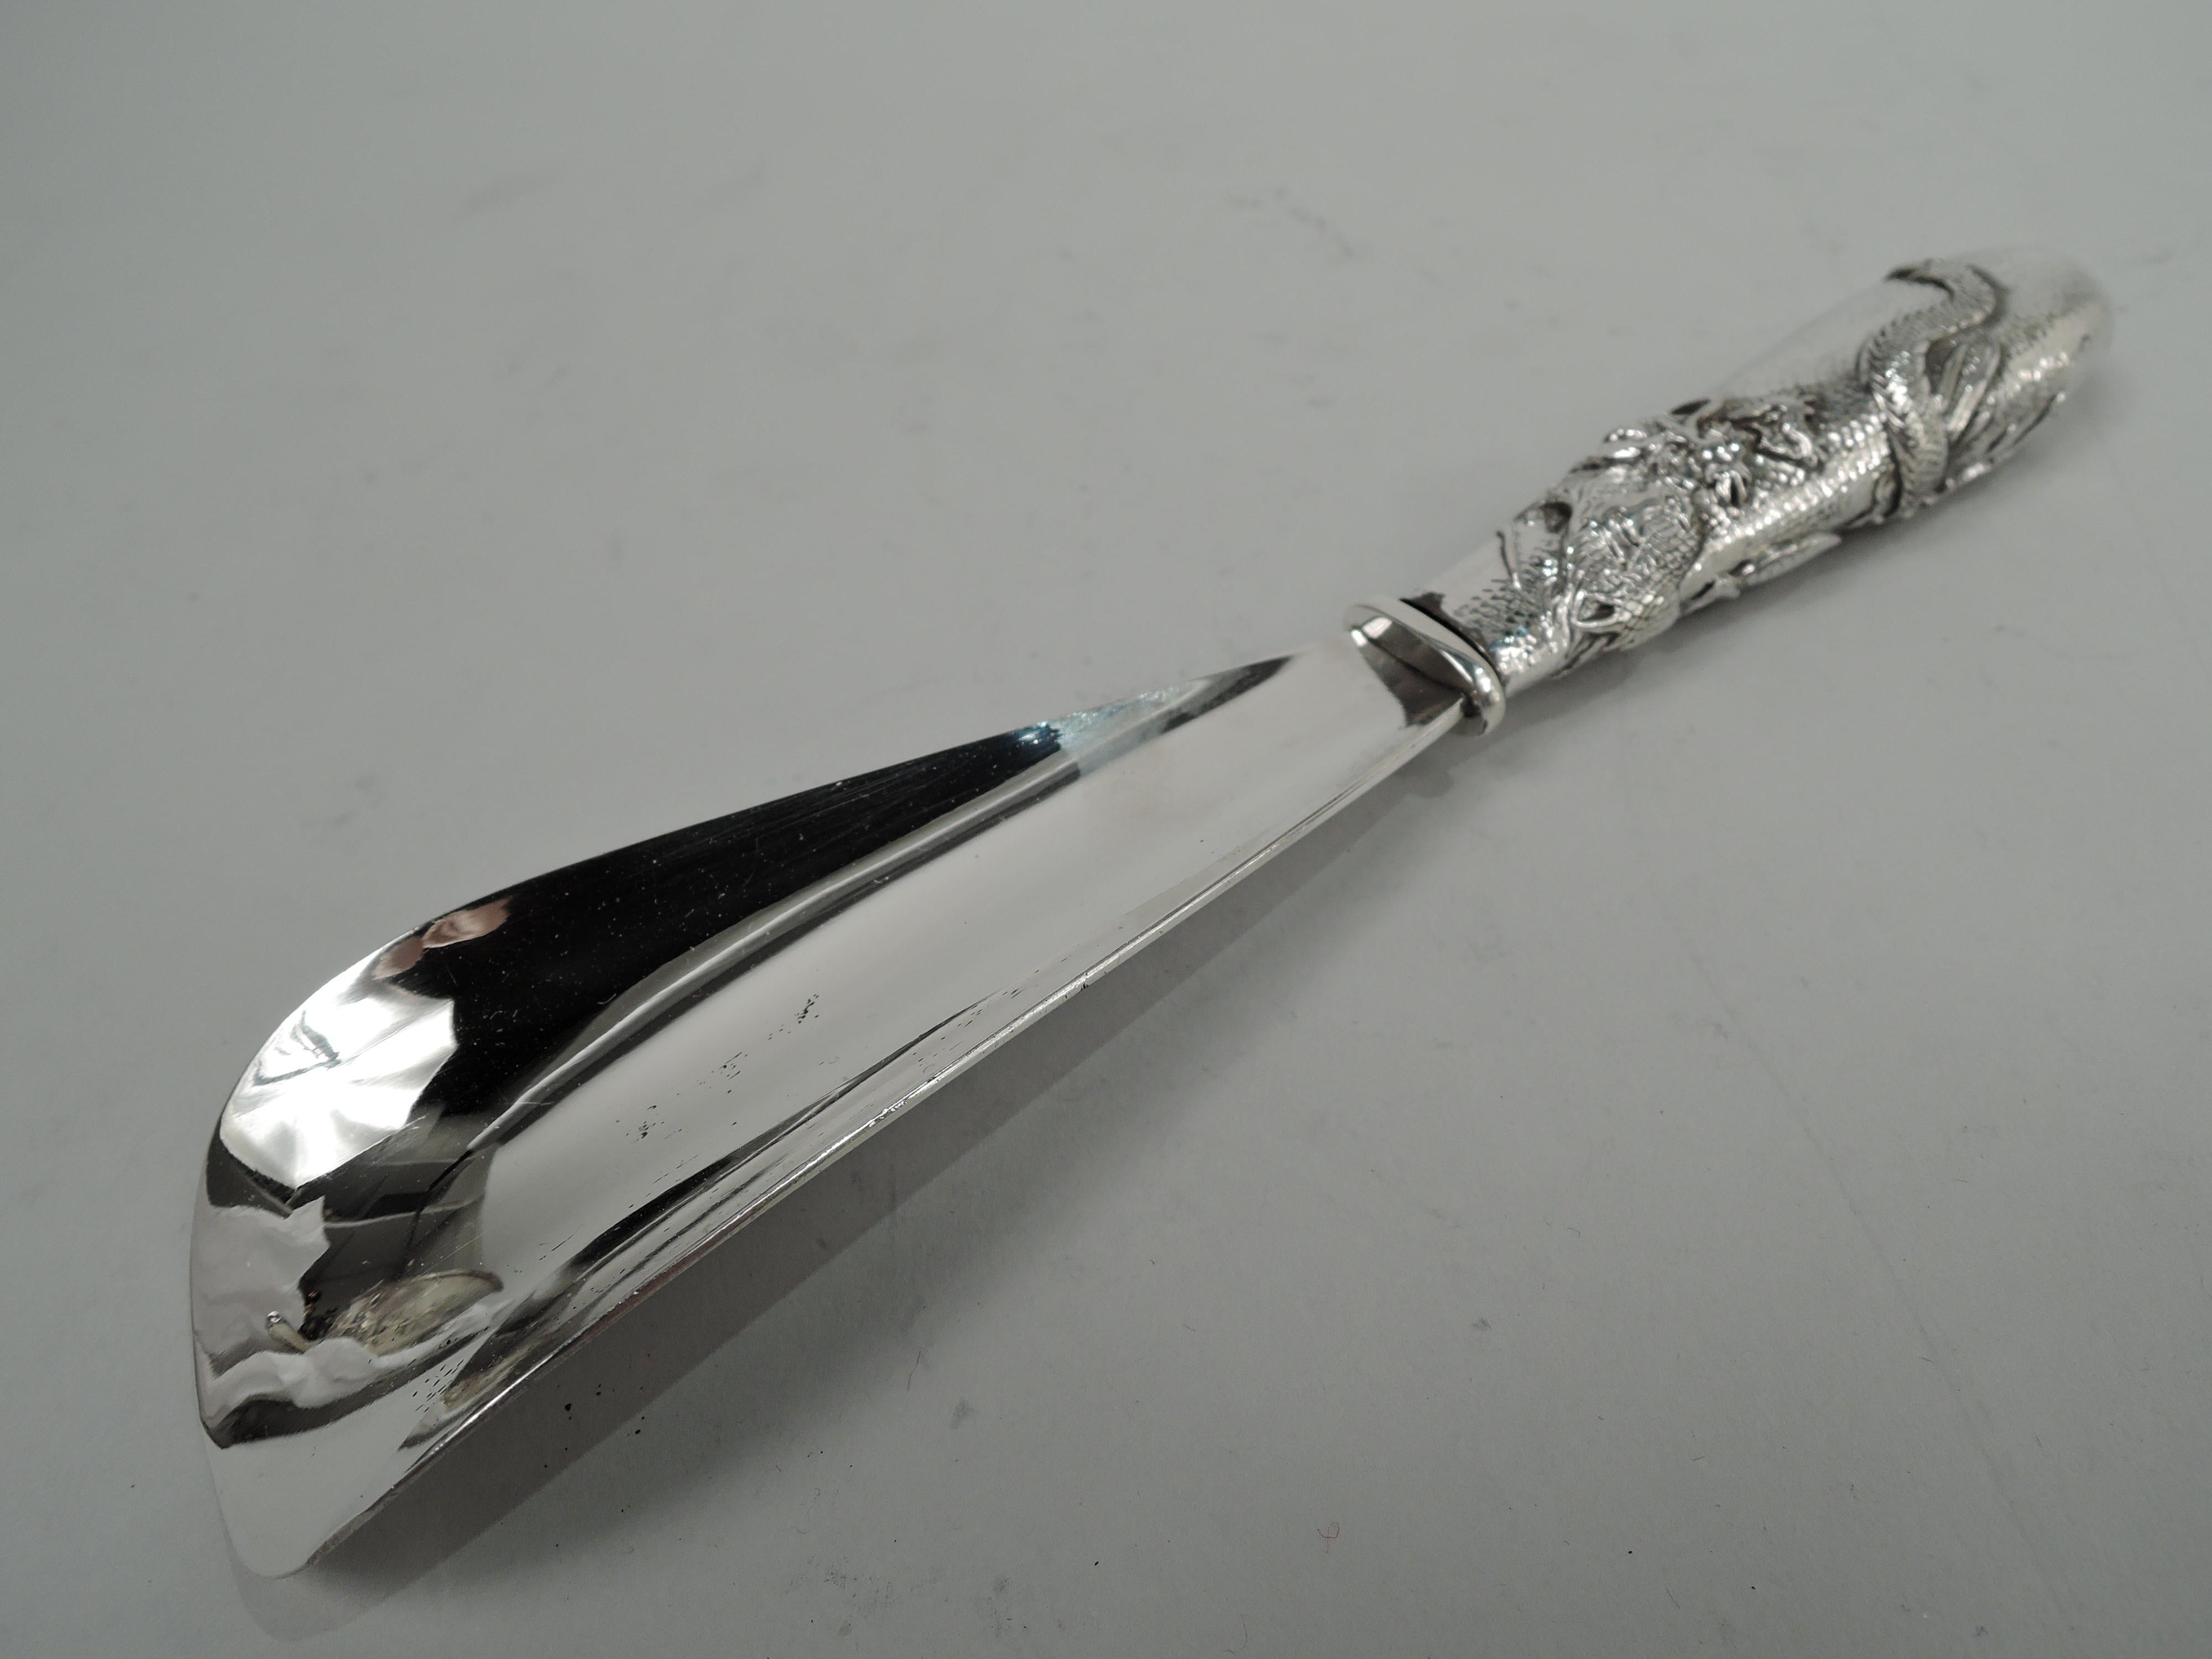 Japanese Meiji silver shoe horn, ca 1900. Retailed by Arthur & Bond in Yokohama. Curved and tapering handle applied with scaly, slithering, horned and taloned dragon; stippled ground. Curved stainless steel blade. Marked “Arthur & Bond / Yokohama /